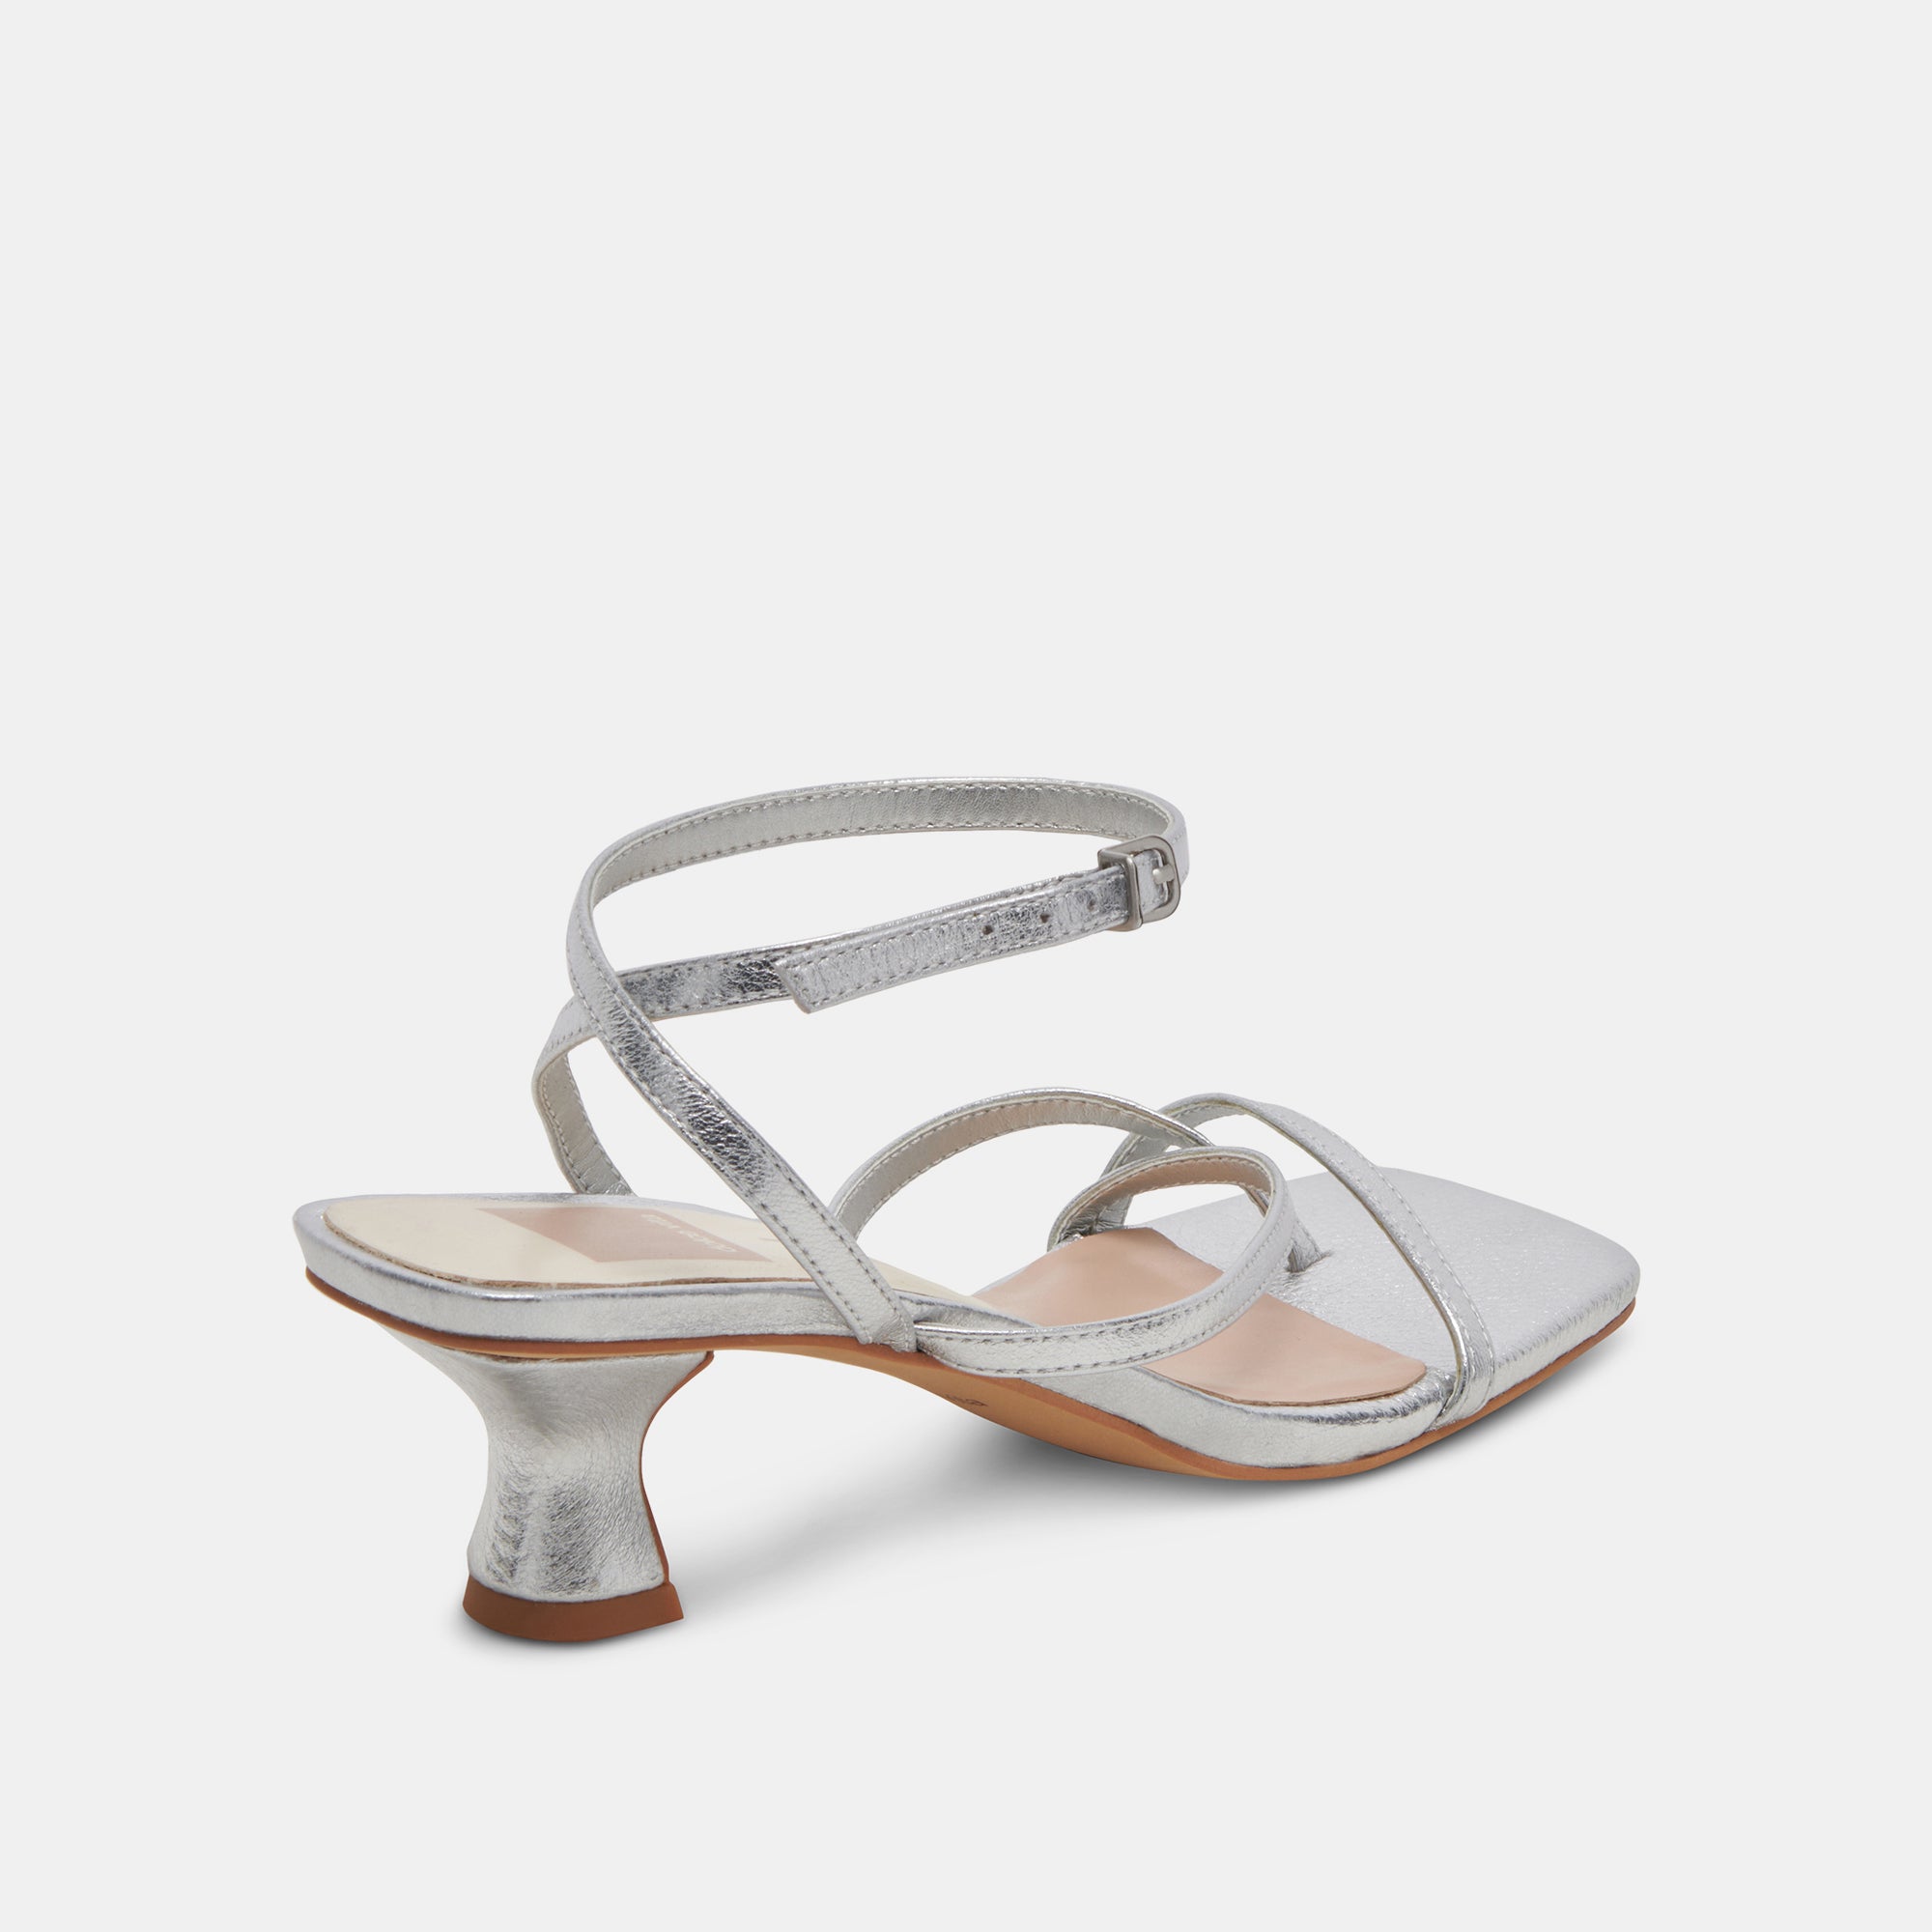 PROSECCO Strappy Kitten Heel Sandal in Silver Leather | Russell & Bromley